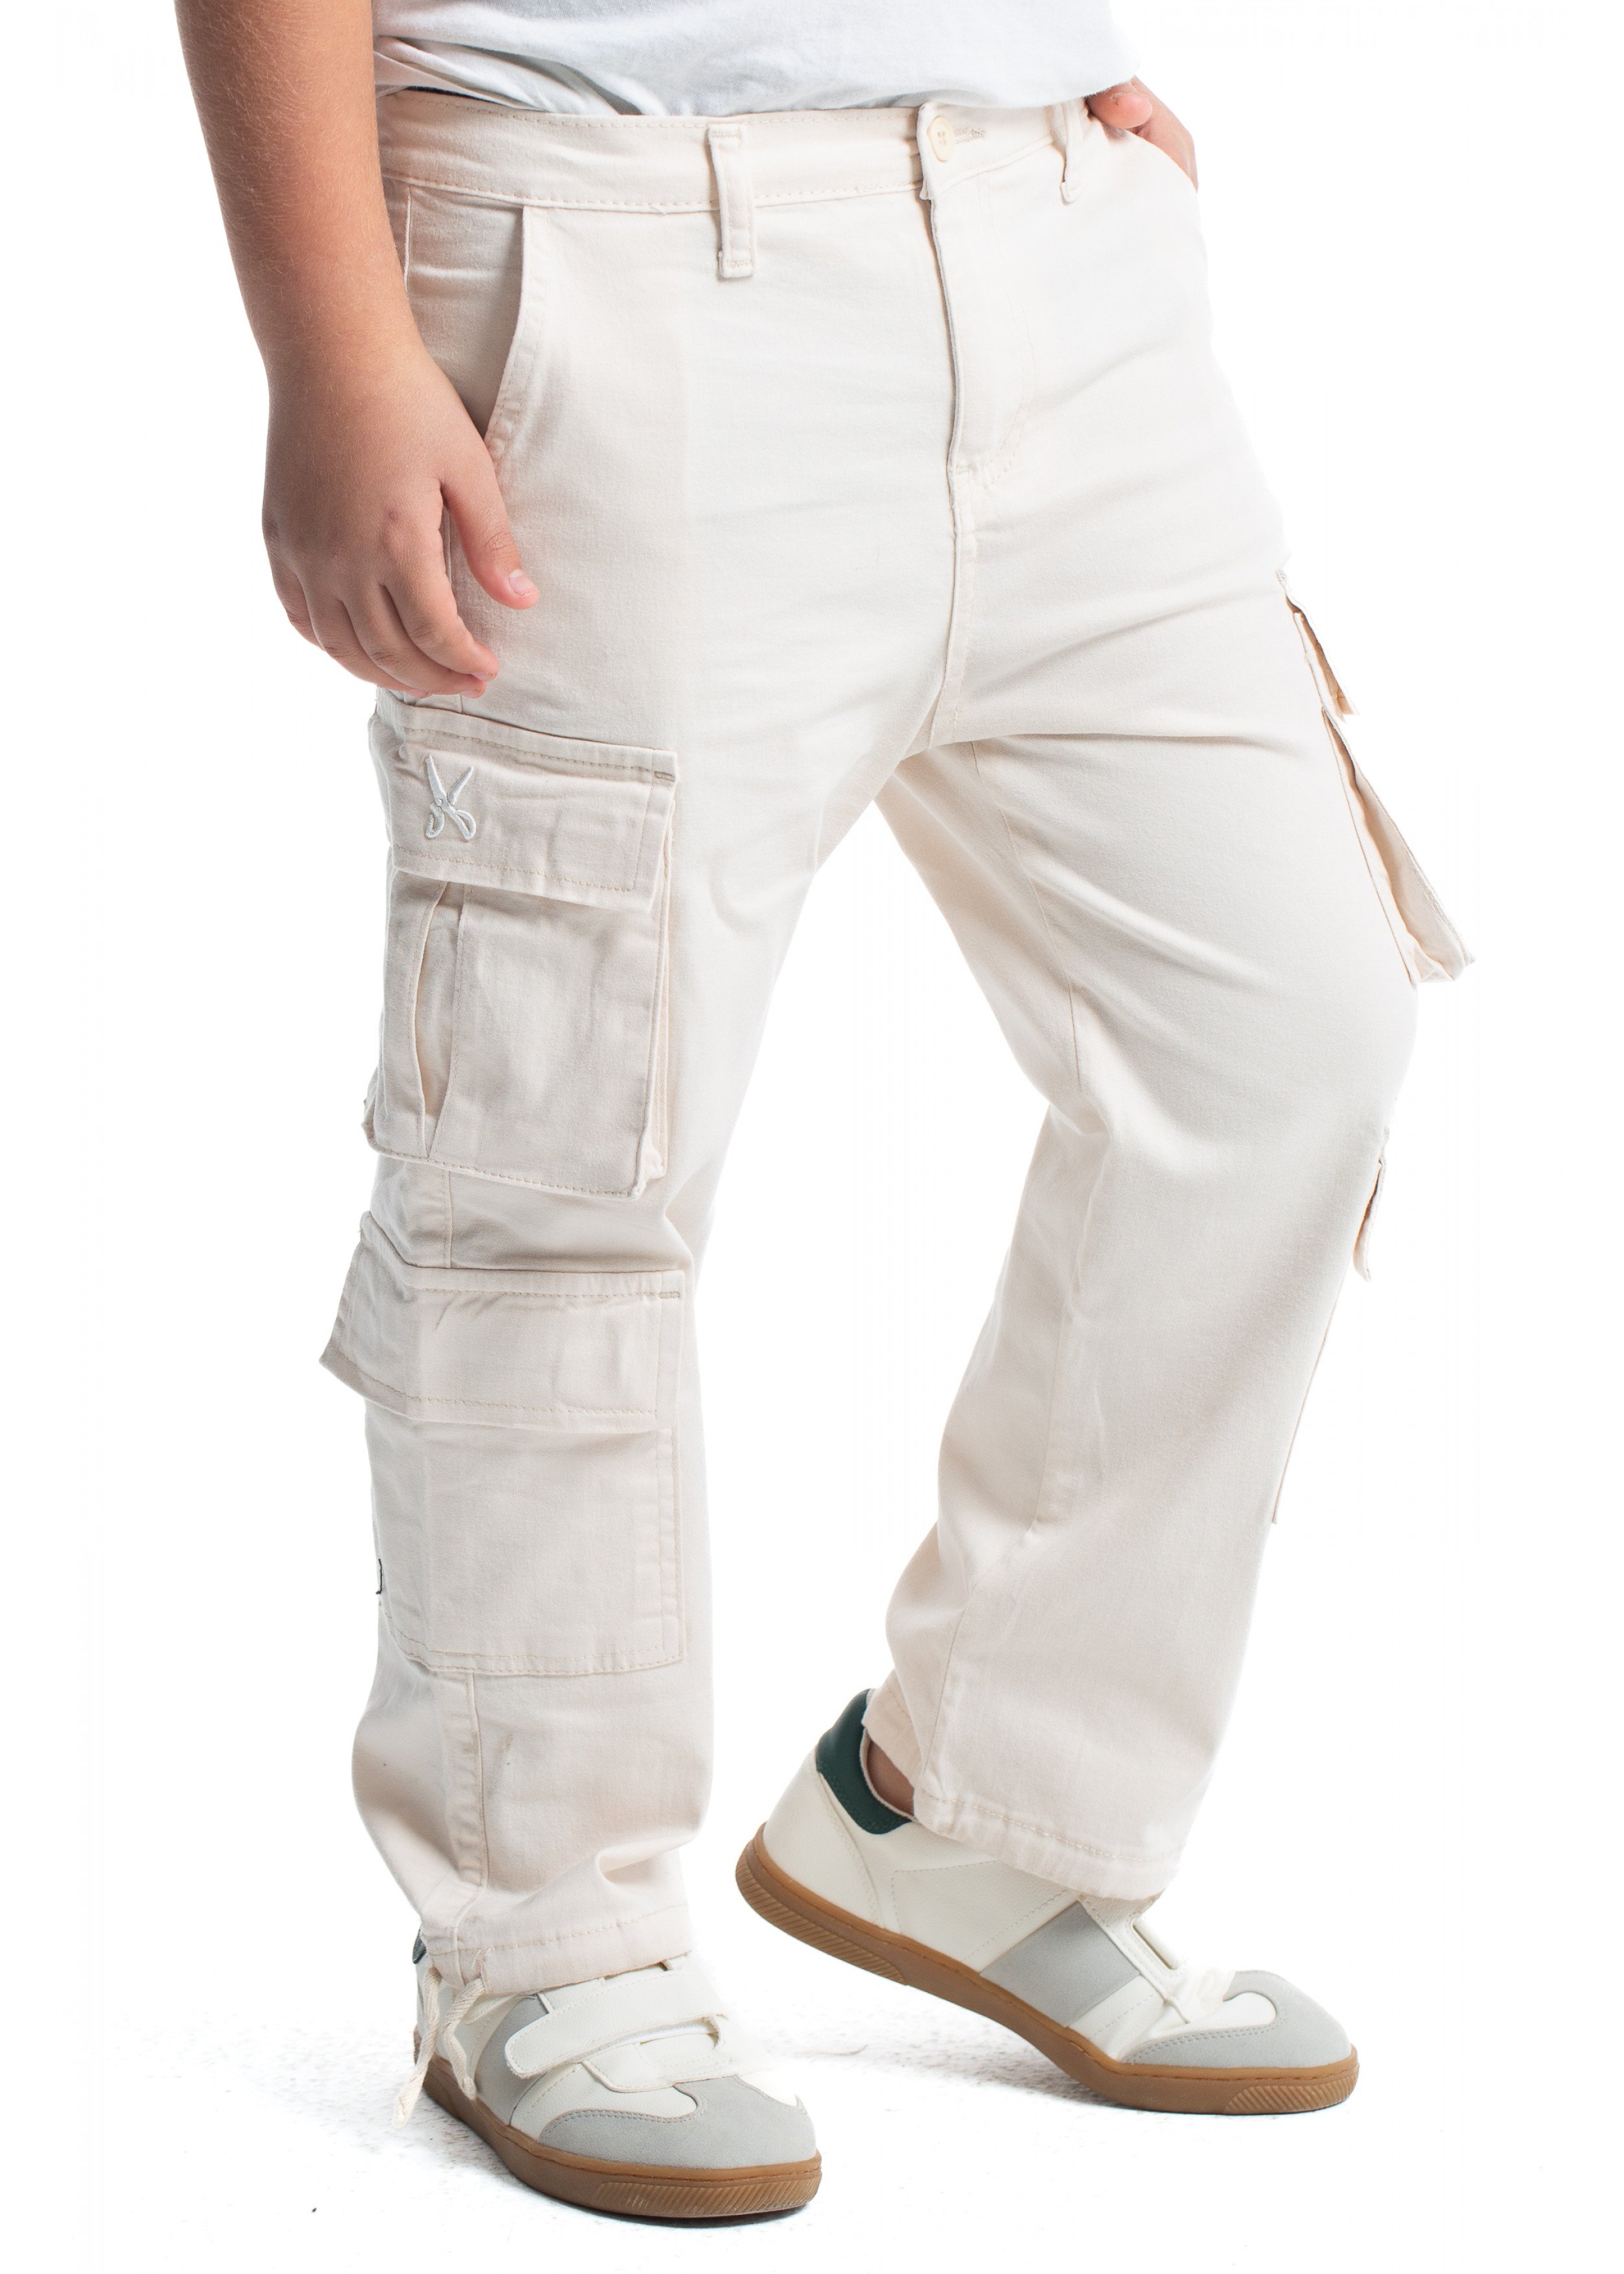  Kids Cargo trousers - Paige